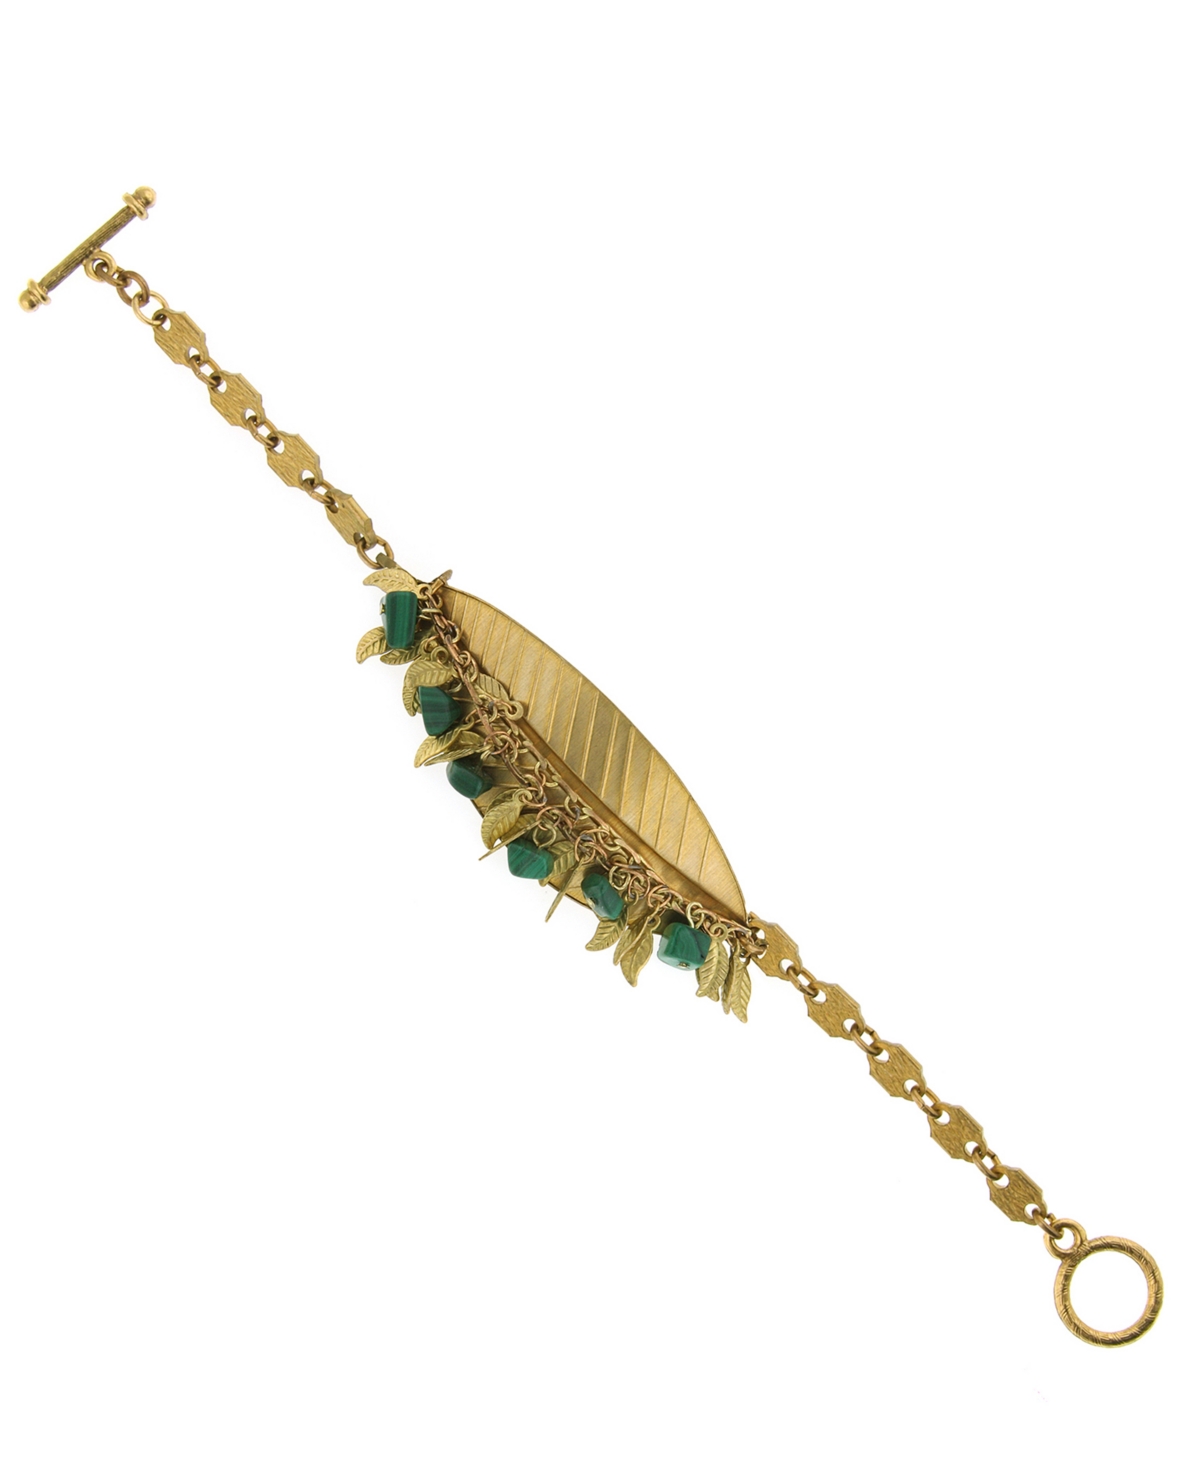 1928 T.r.u. By  Gold Tone Leaf Toggle Bracelet Accented With Semi-precious Malachite Chips In Green